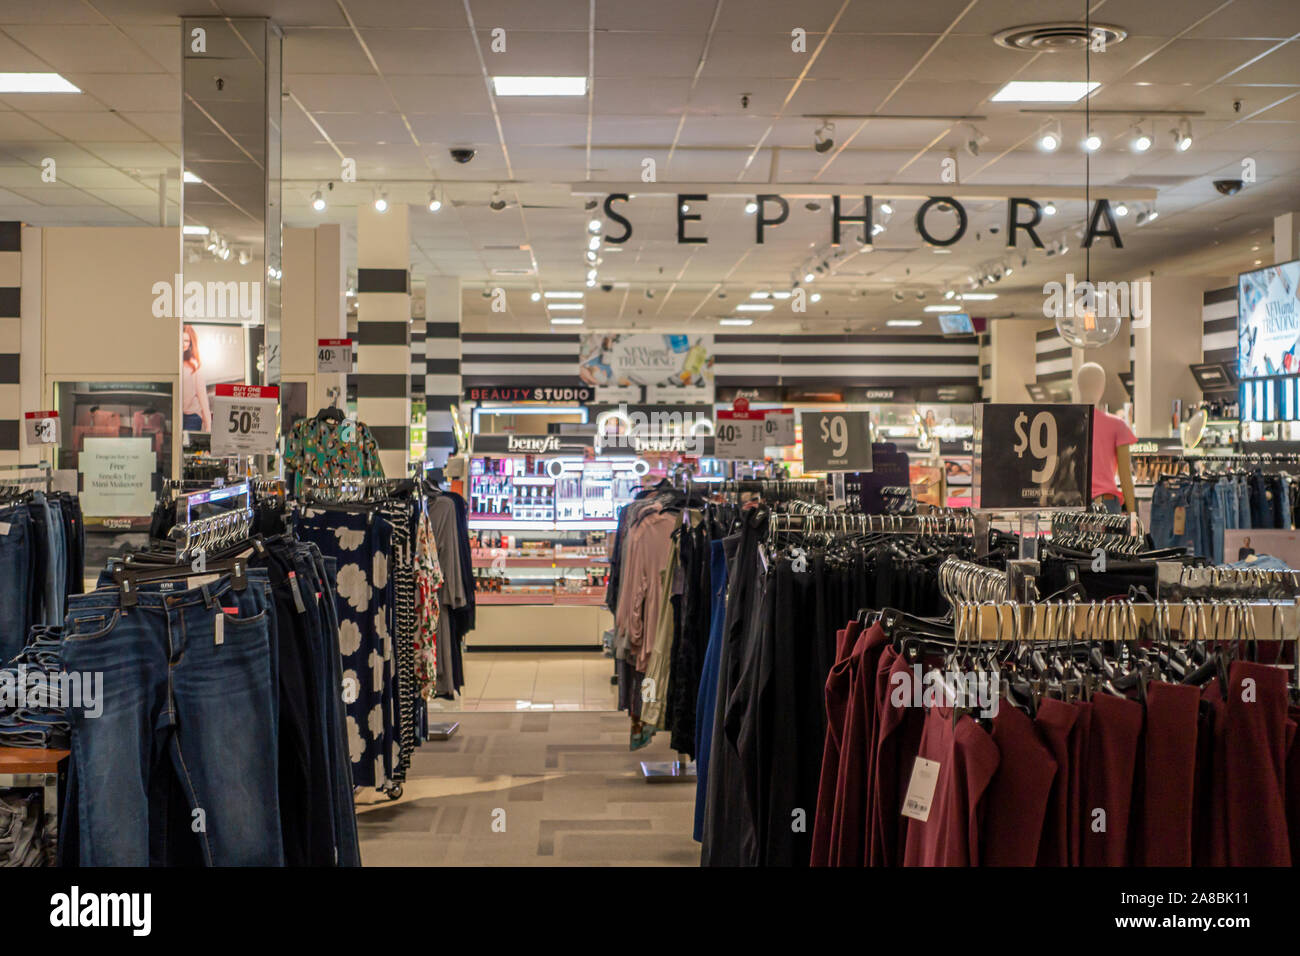 Interior of J C Penny showing women’s clothing and Sephora cosmetic department. USA Stock Photo